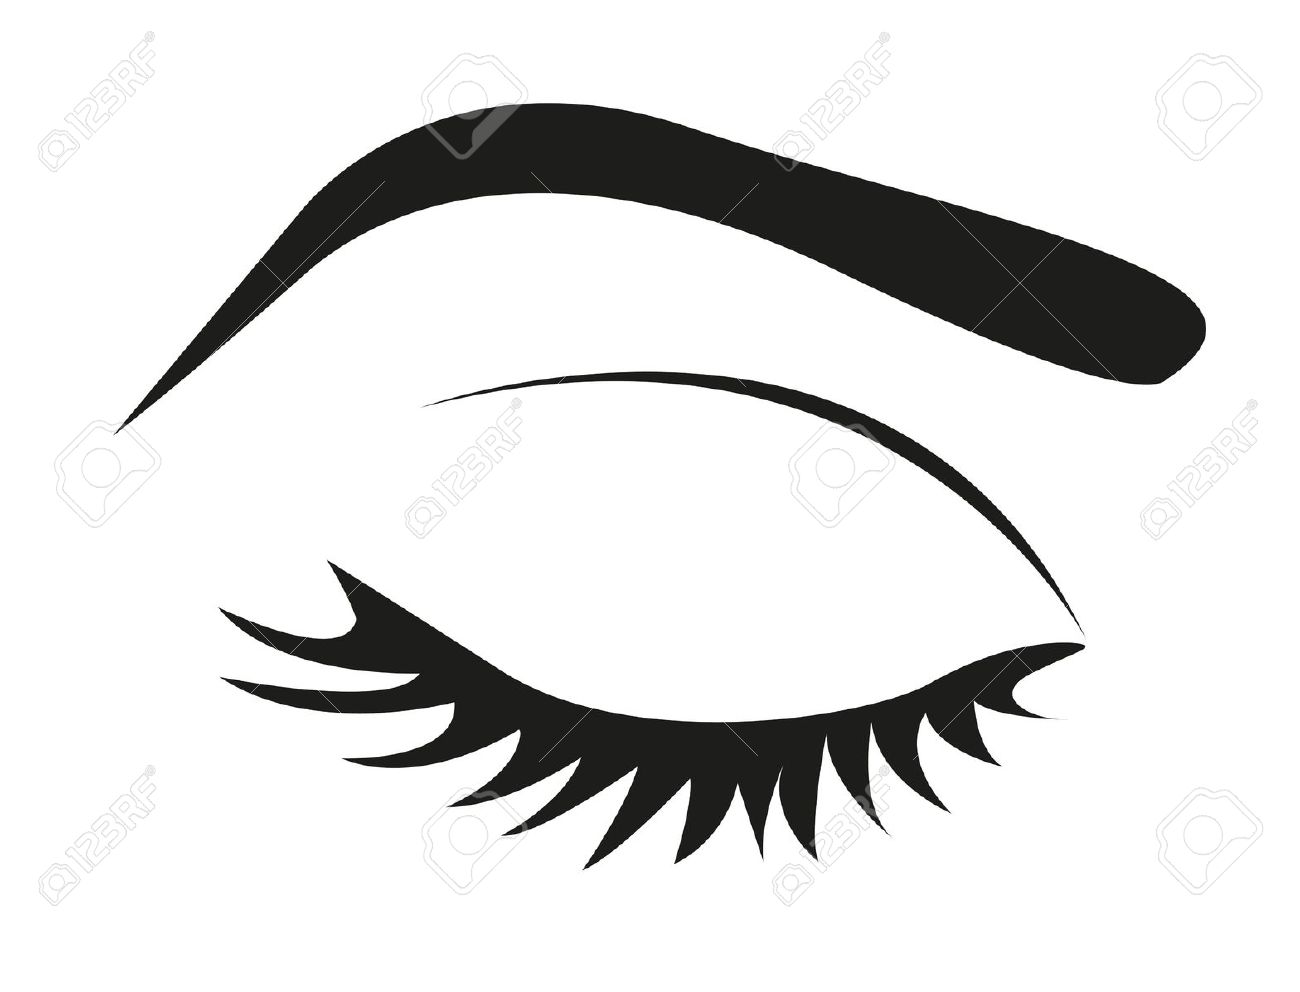 eyebrow clipart black and white - Clipground